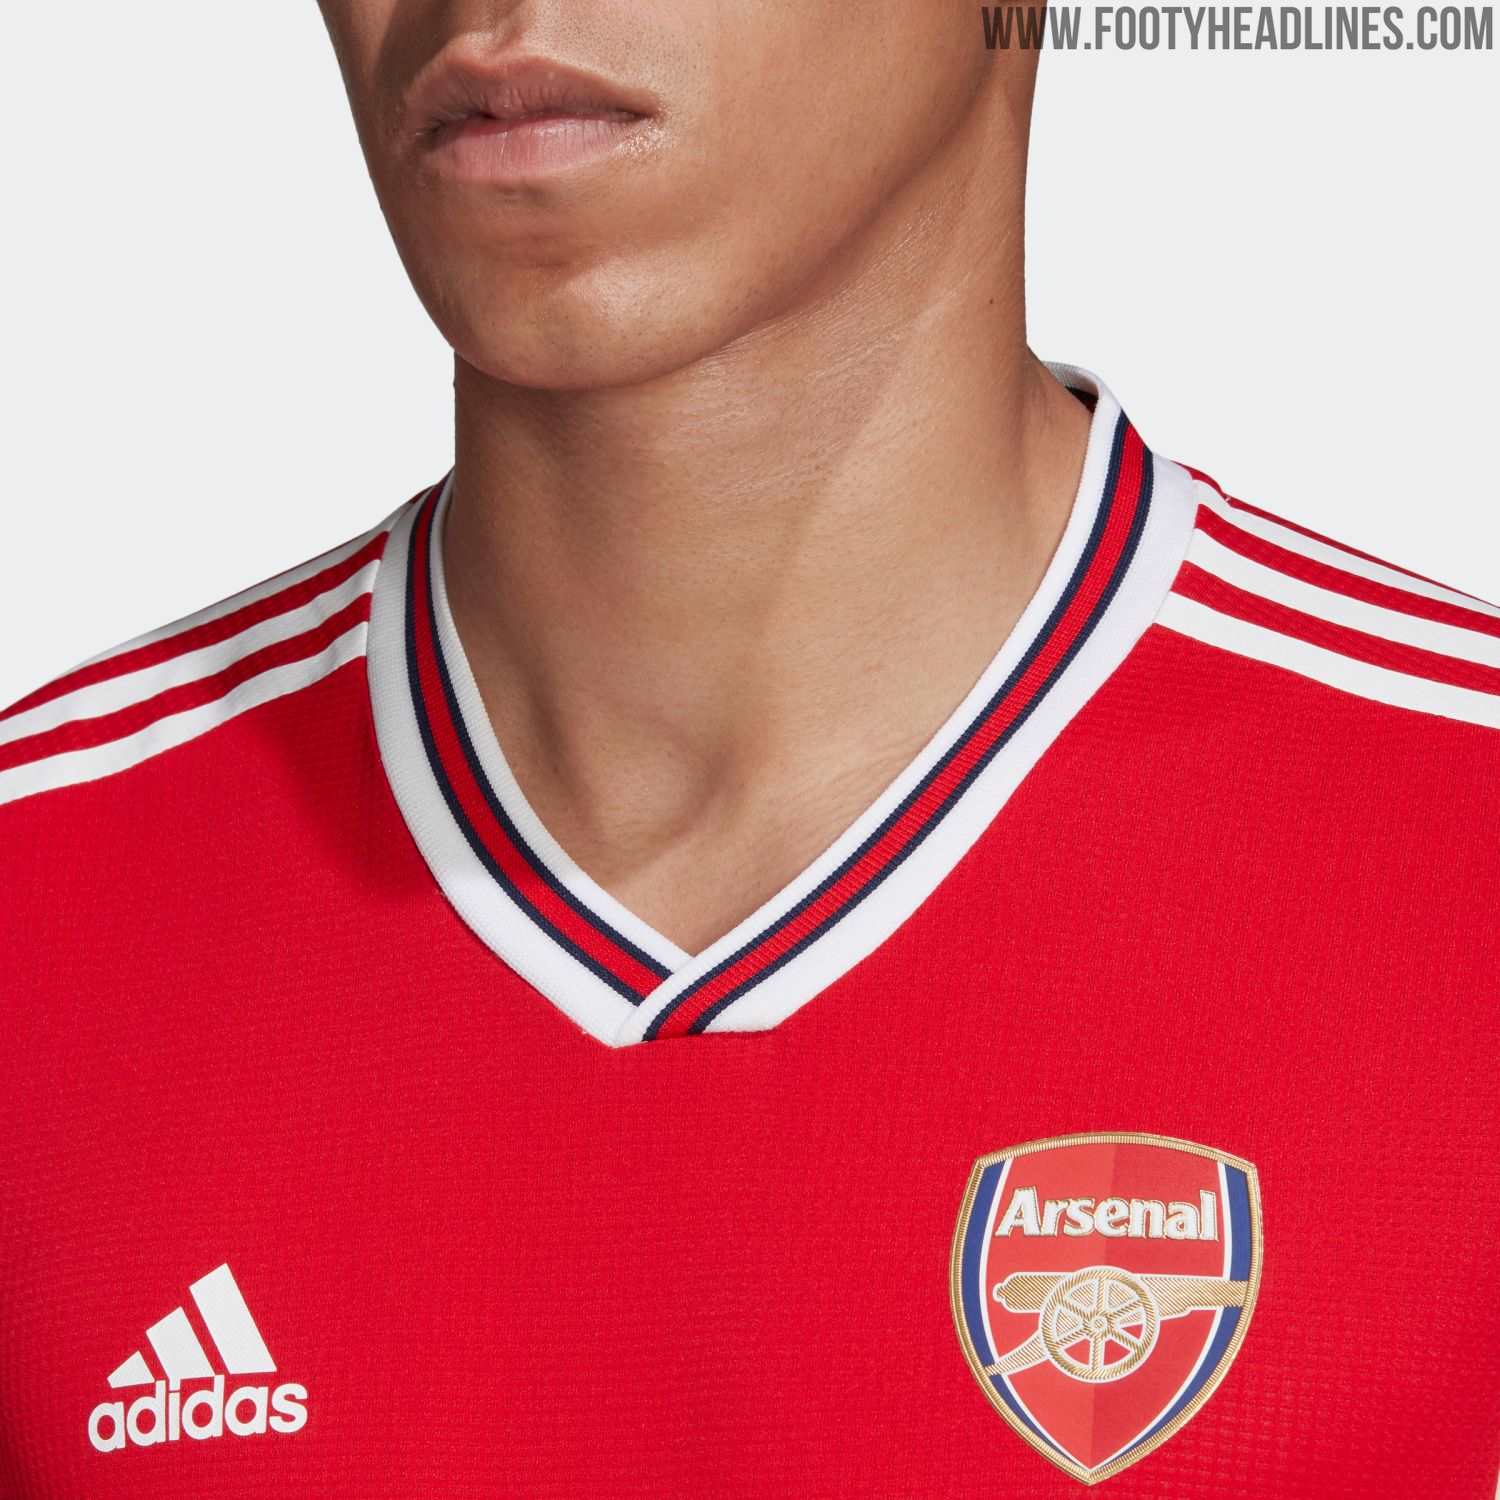 Arsenal 2019/20 Home Kit by adidas Official Look